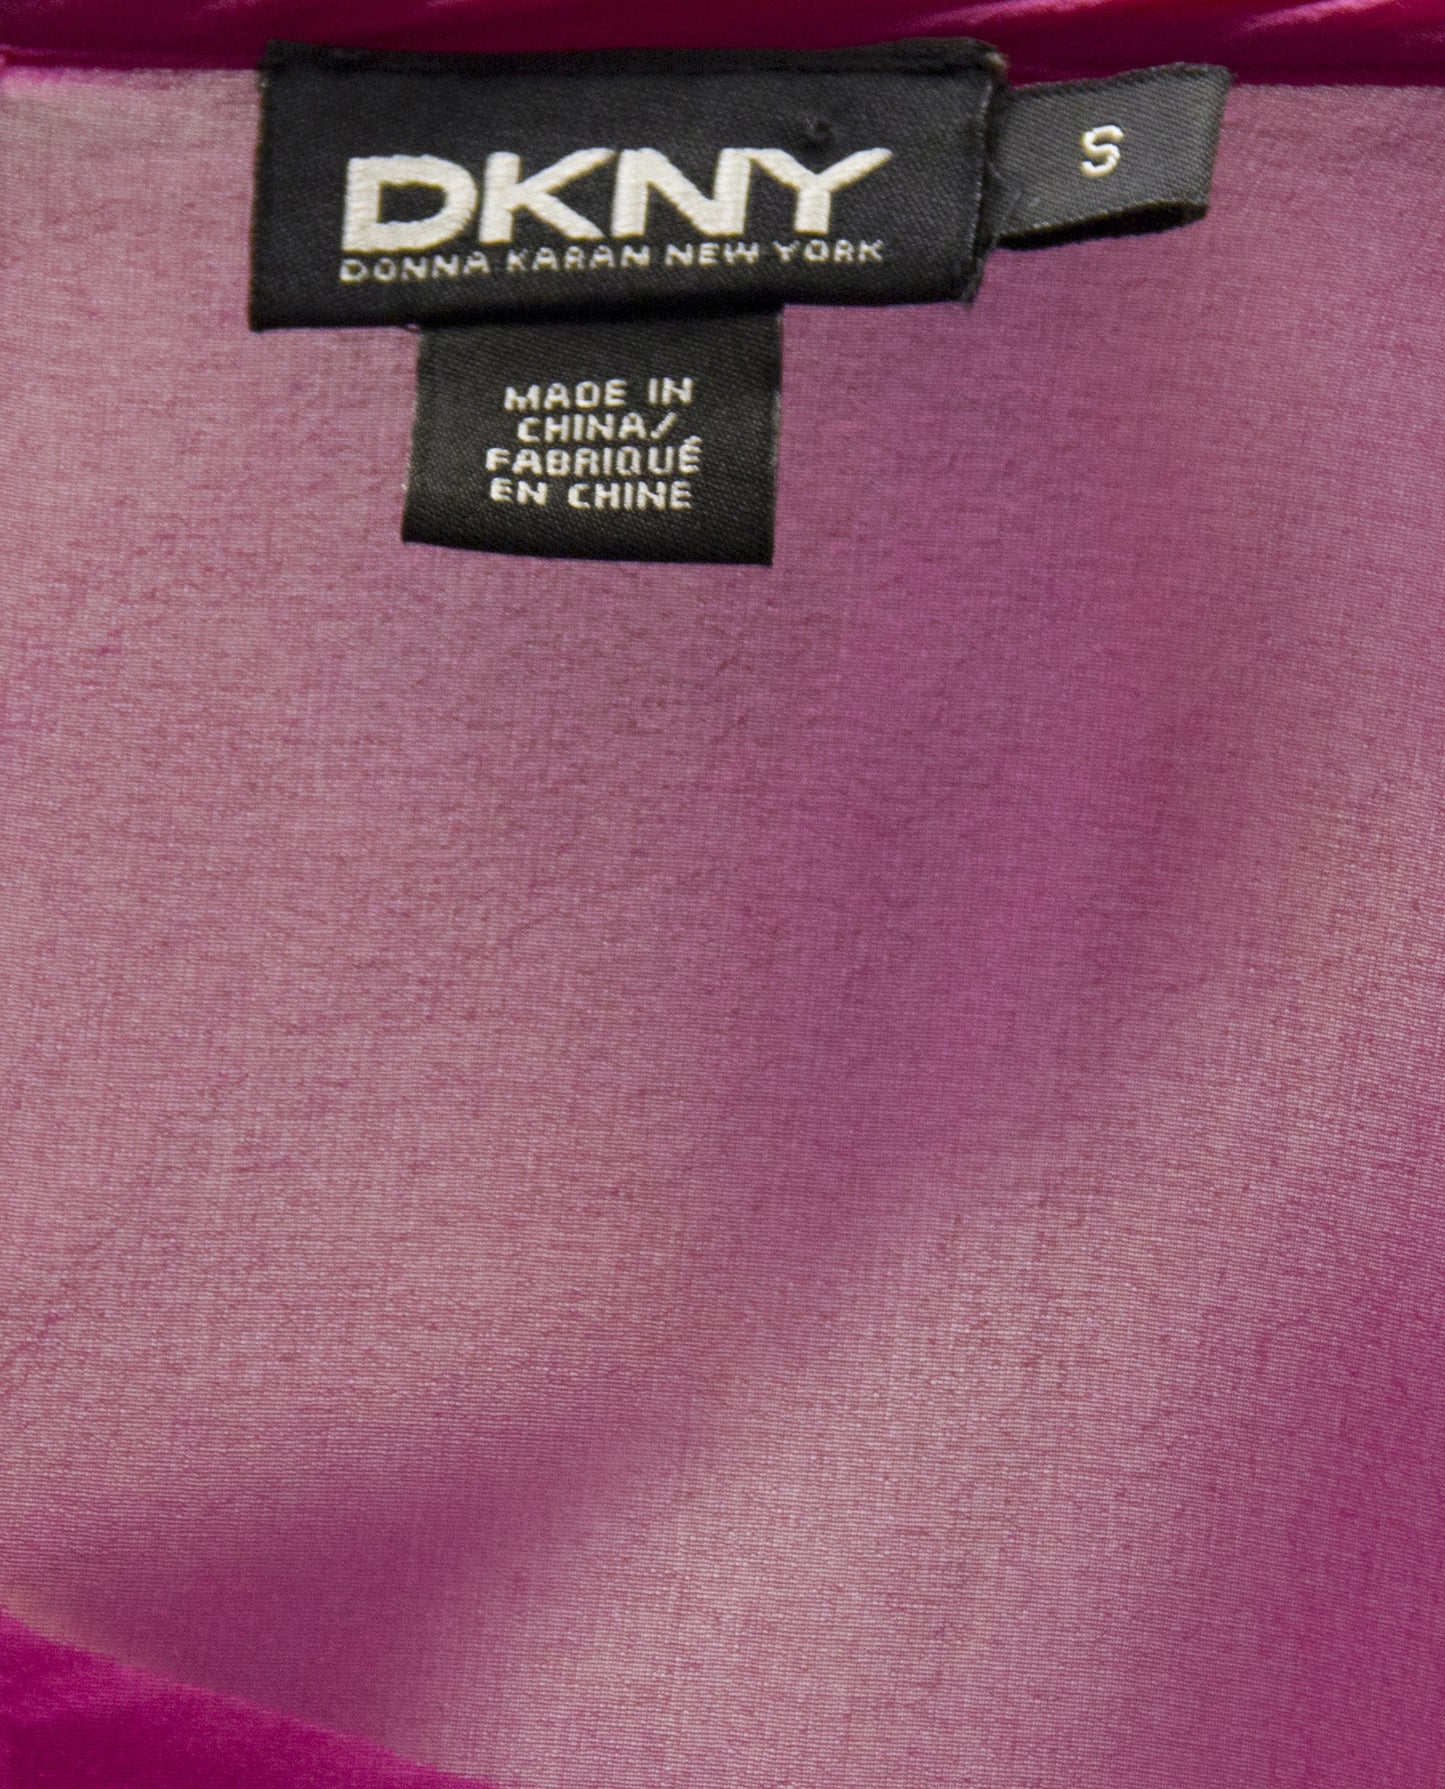 DKNY Pink Tulip Top Size S (SKU 000005) - Designers On A Dime - 4